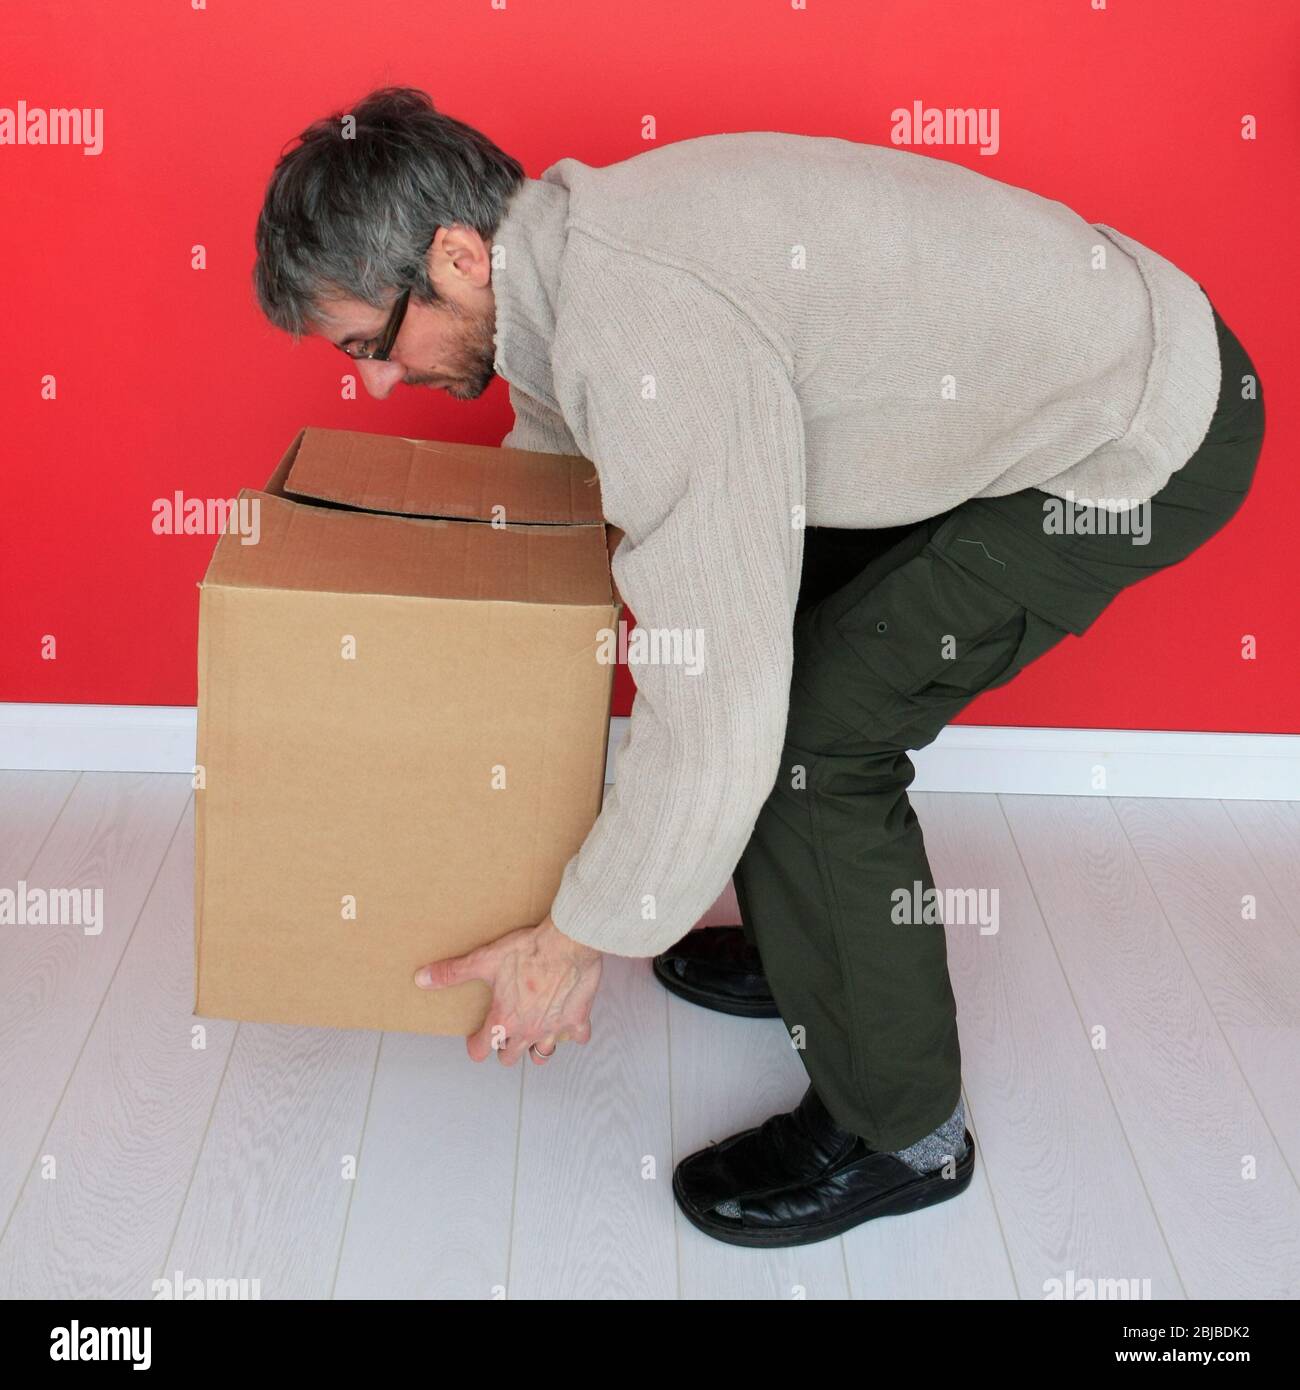 Male bending his knees to lift a heavy box Stock Photo